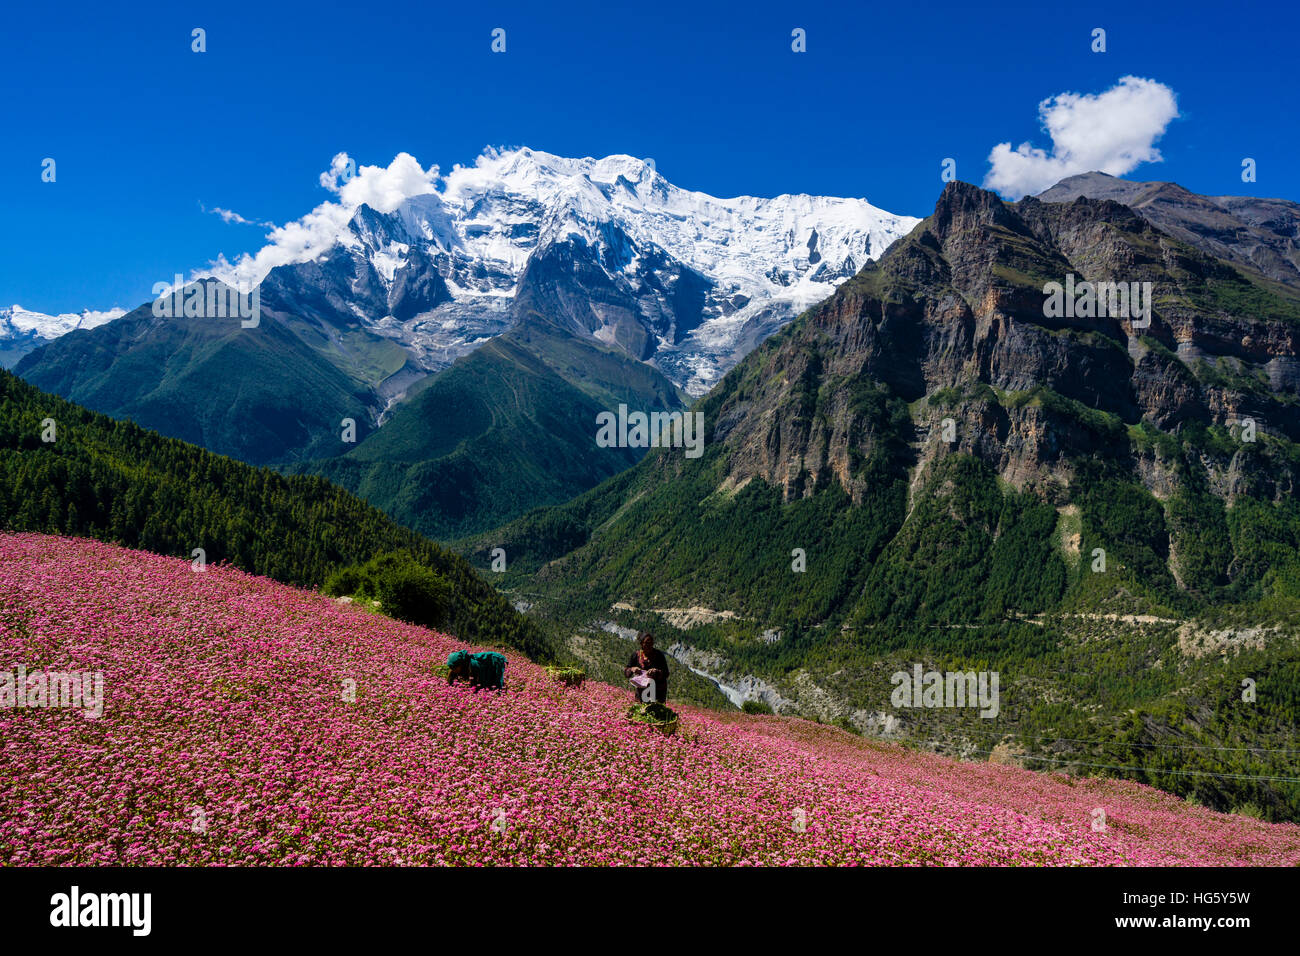 Farmhouse with pink buckwheat fields in blossom, Upper Marsyangdi valley, mountain Annapurna 2 in distance, Ghyaru Stock Photo